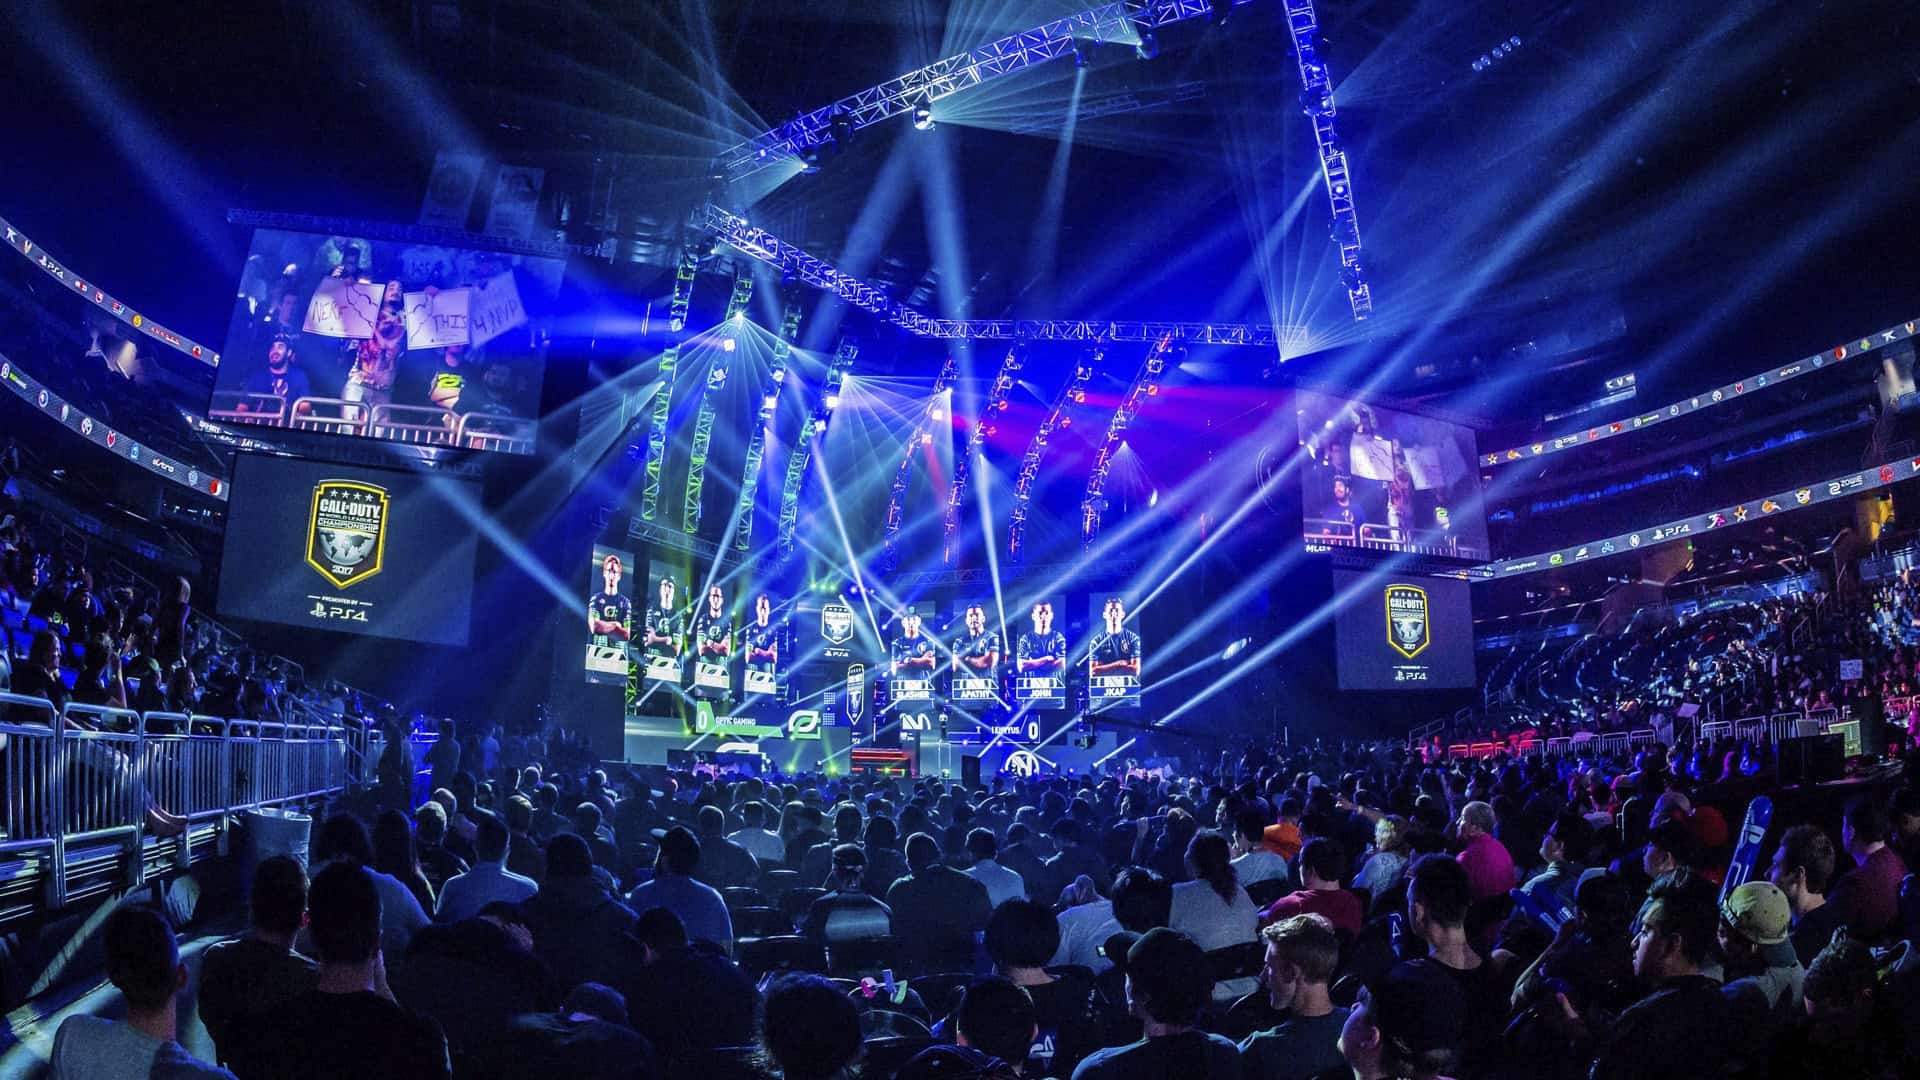 Call Of Duty League Franchise Coming To Toronto, In Of Duty Esports HD Wallpaper